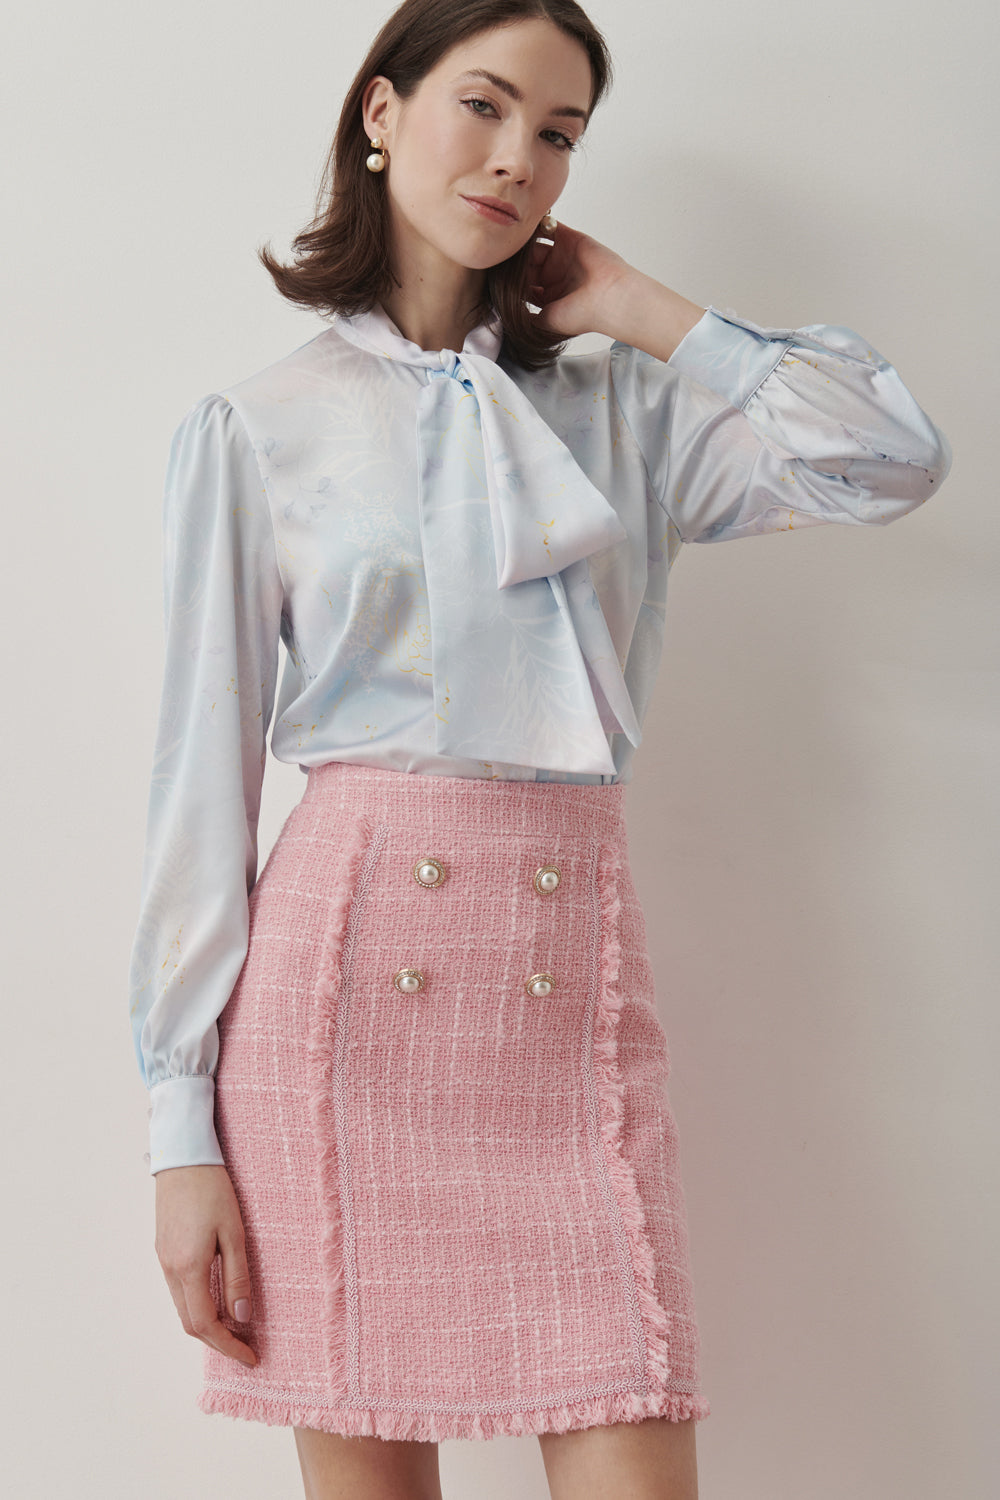 Shirt in pastel shades with a floral print